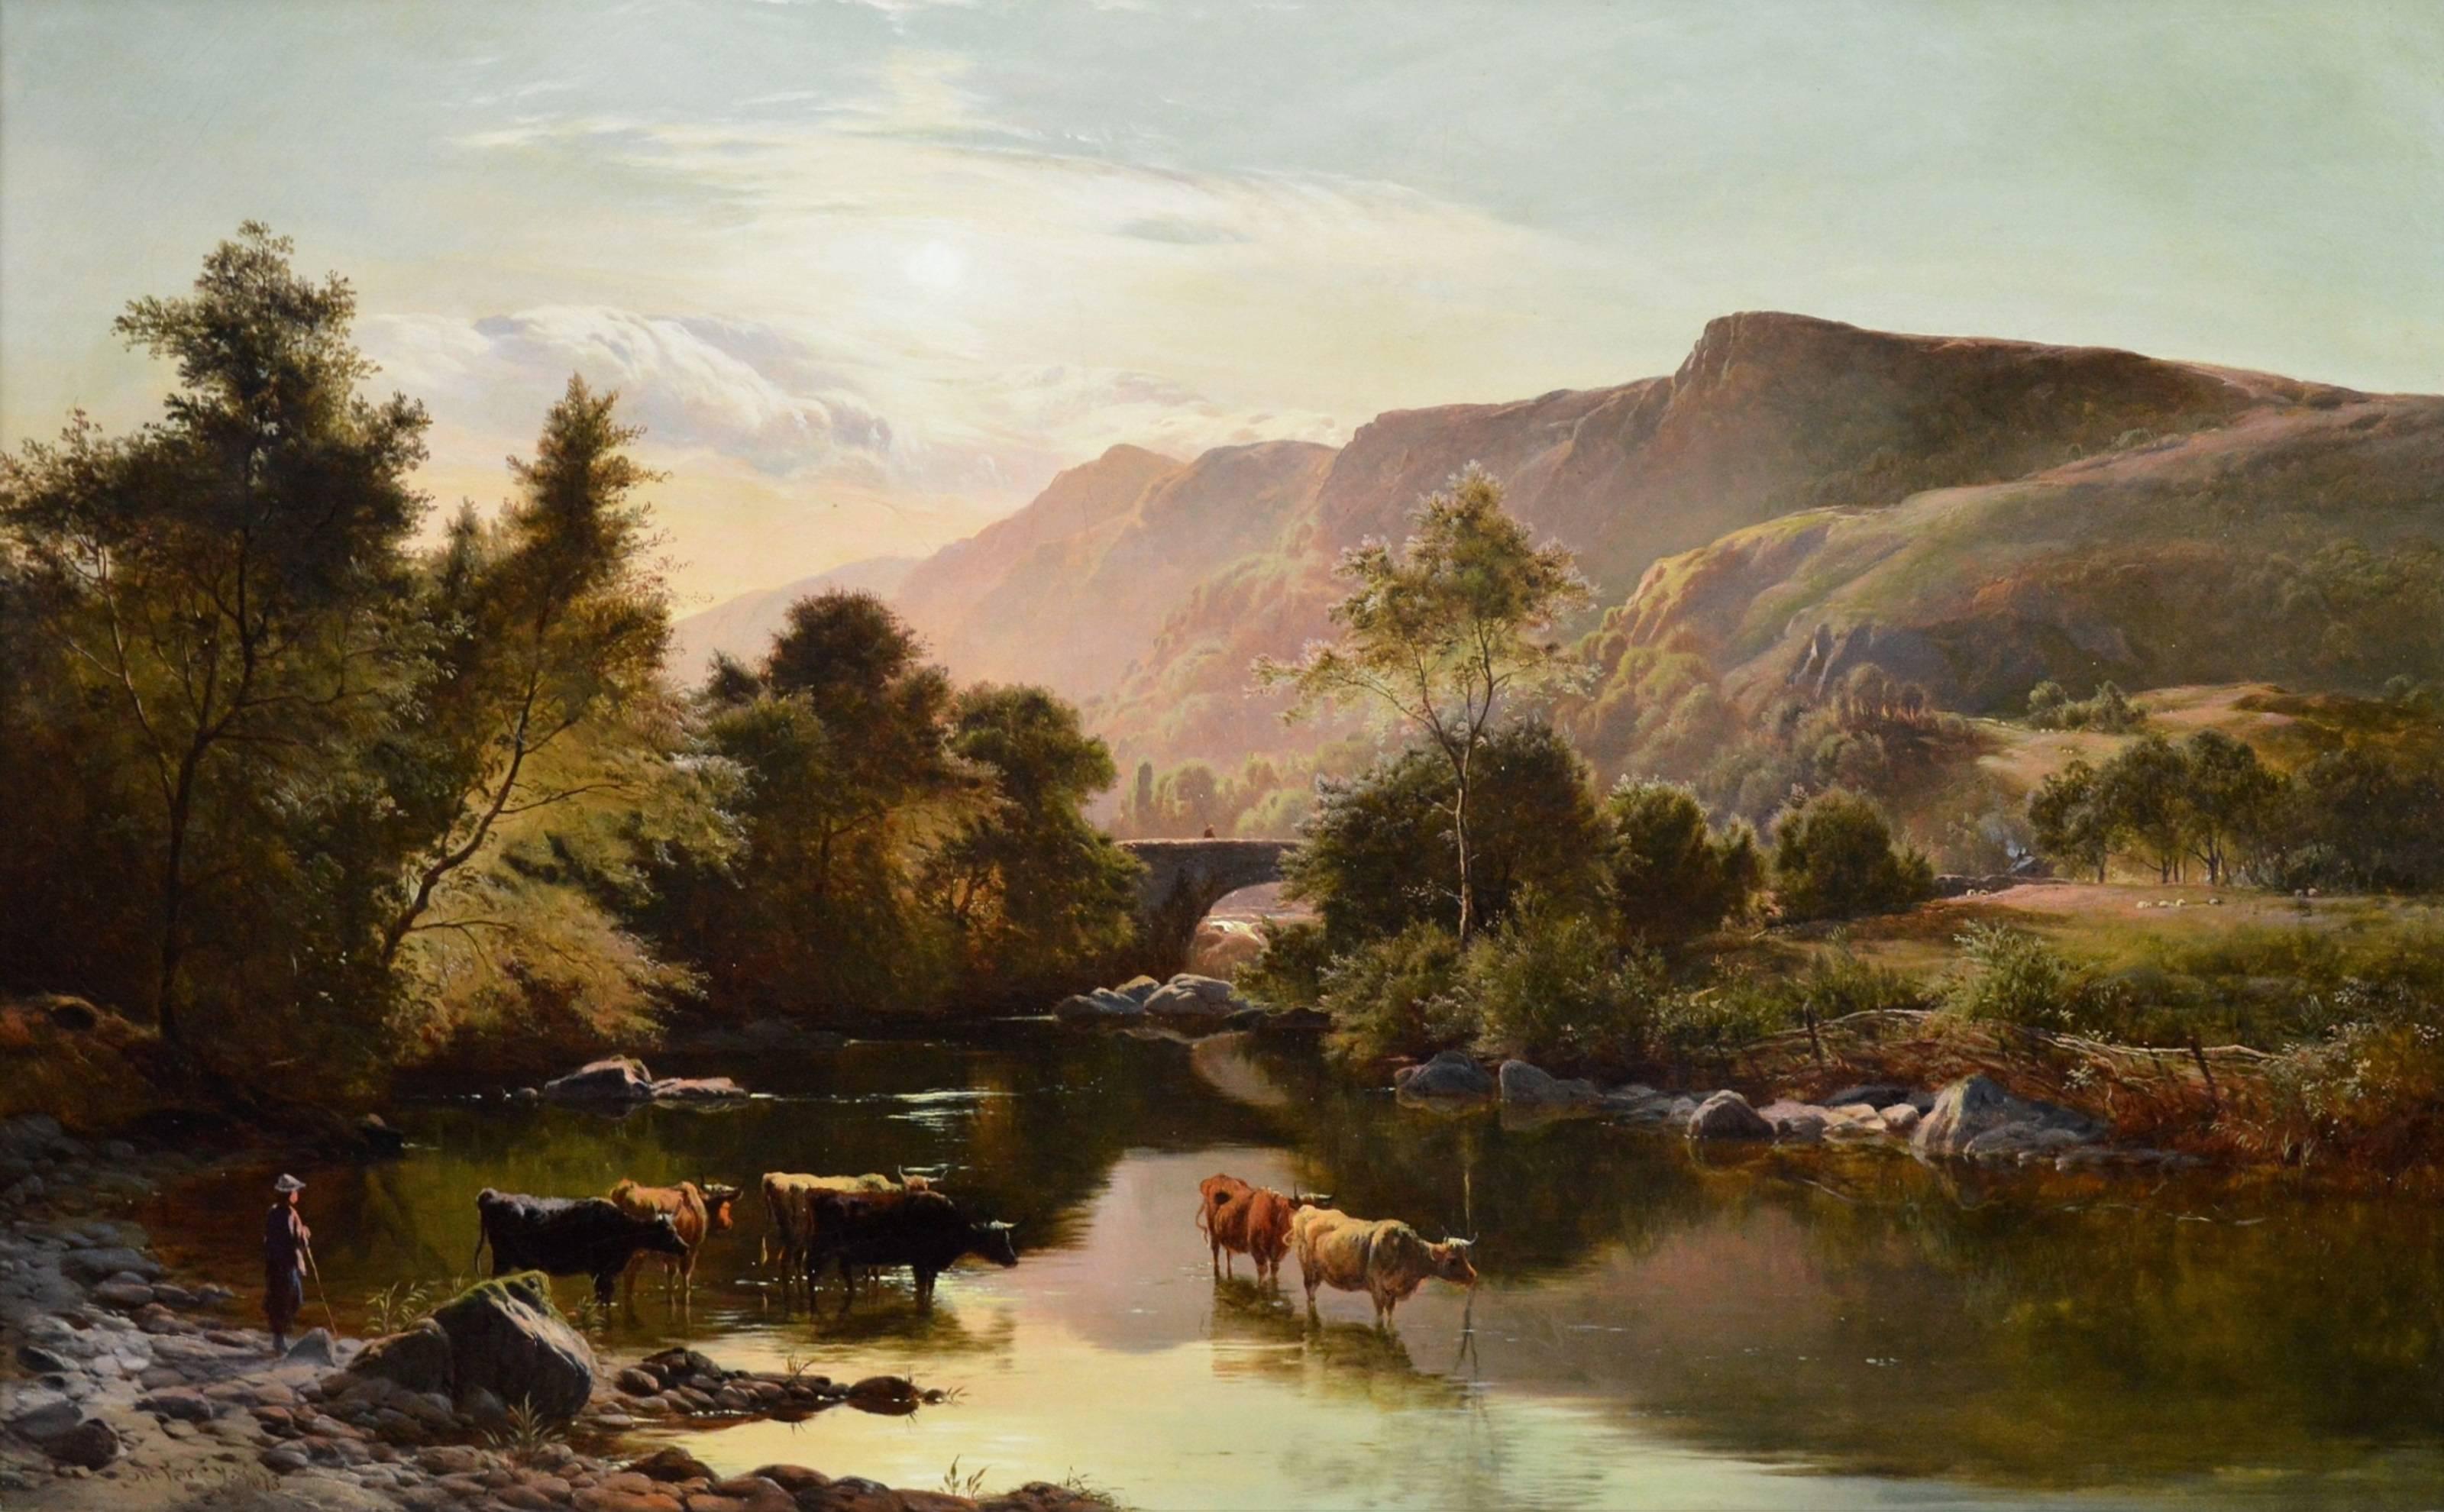 This is a very fine large 19th century oil on canvas depicting cattle watering at the riverside in an extensive mountainous summer landscape ‘Near Betwys-y-Coed, North Wales’ by the important Victorian landscape painter Sidney Richard Percy